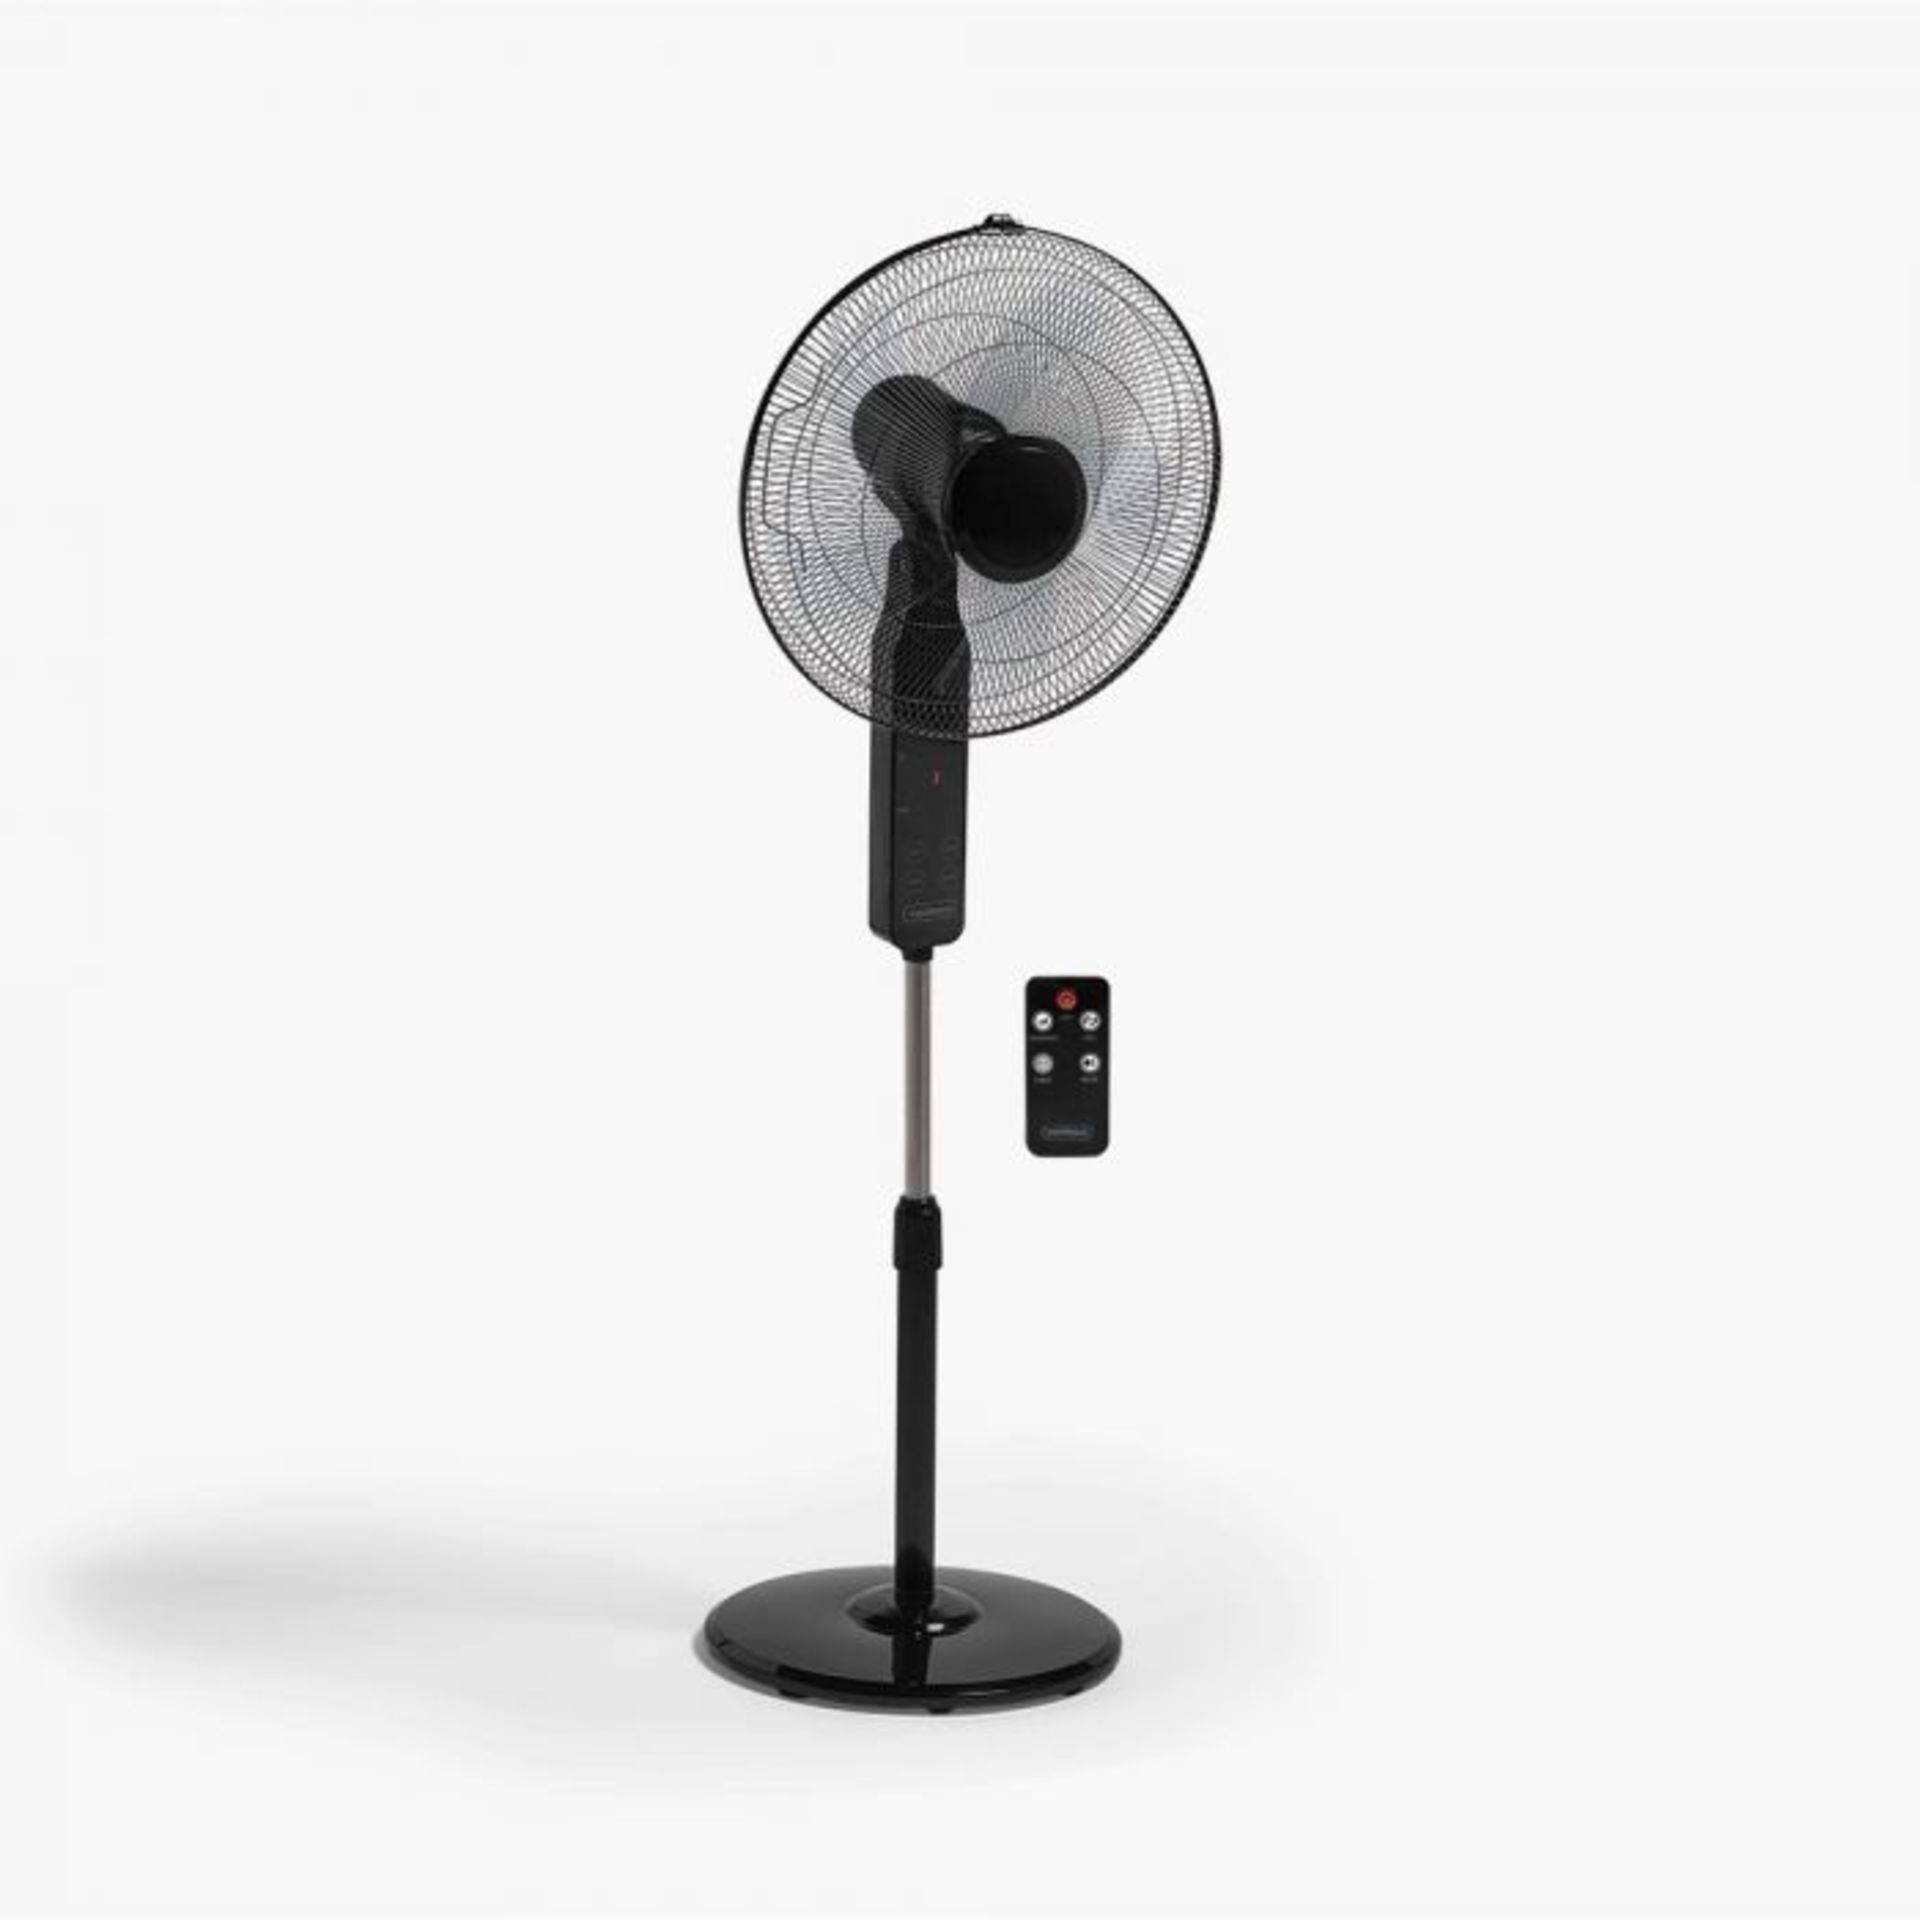 16" Black Pedestal DC Fan. Easy to use and versatile, this classic pedestal fan is must-have for hot